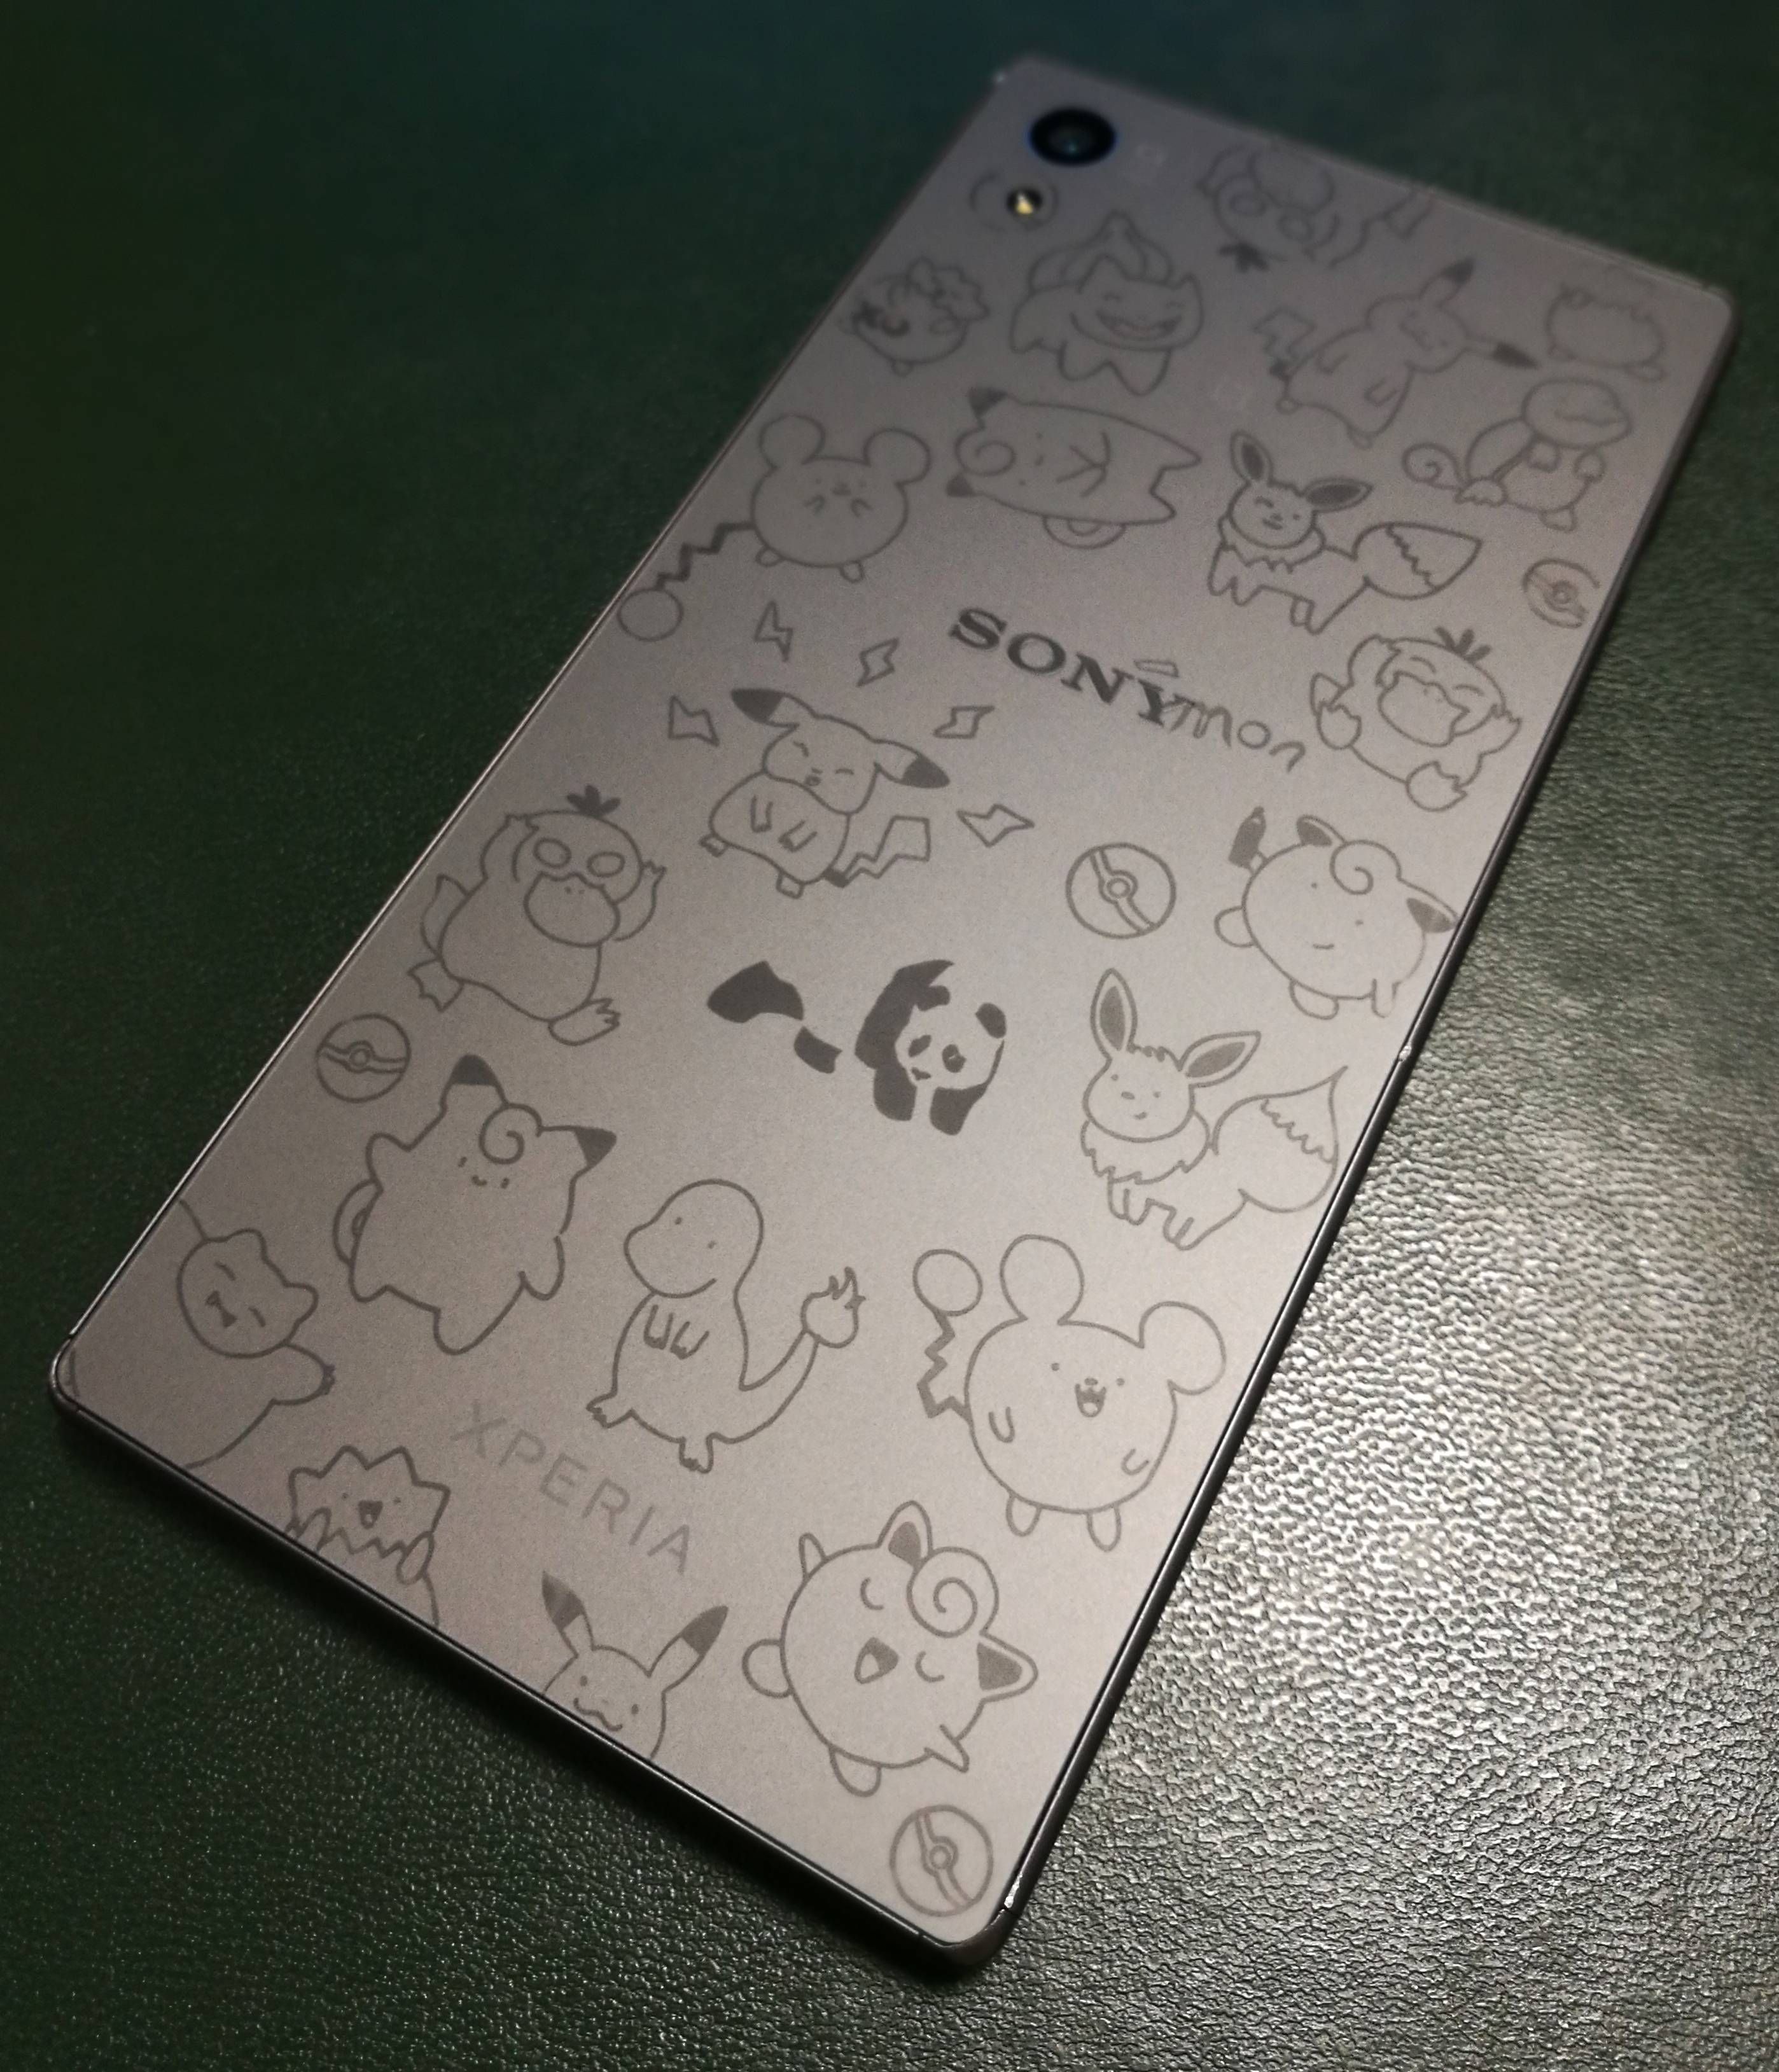 I laser etched my phone today with pokemon doodles. Pretty happy with the results.